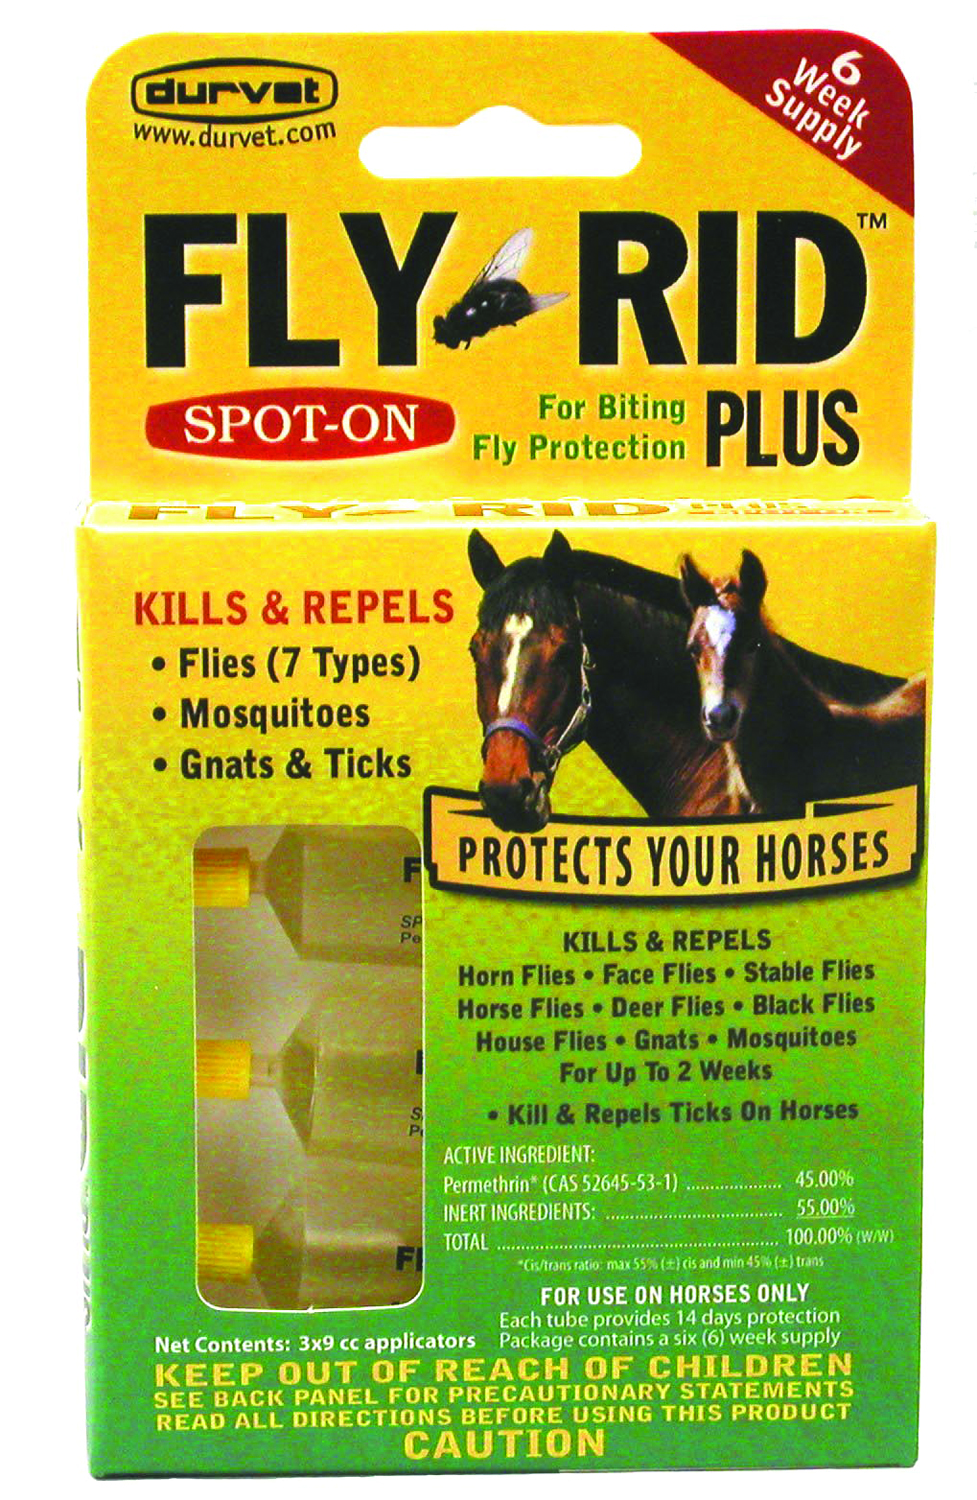 FLY RID PLUS SPOT-ON 3 DOSE